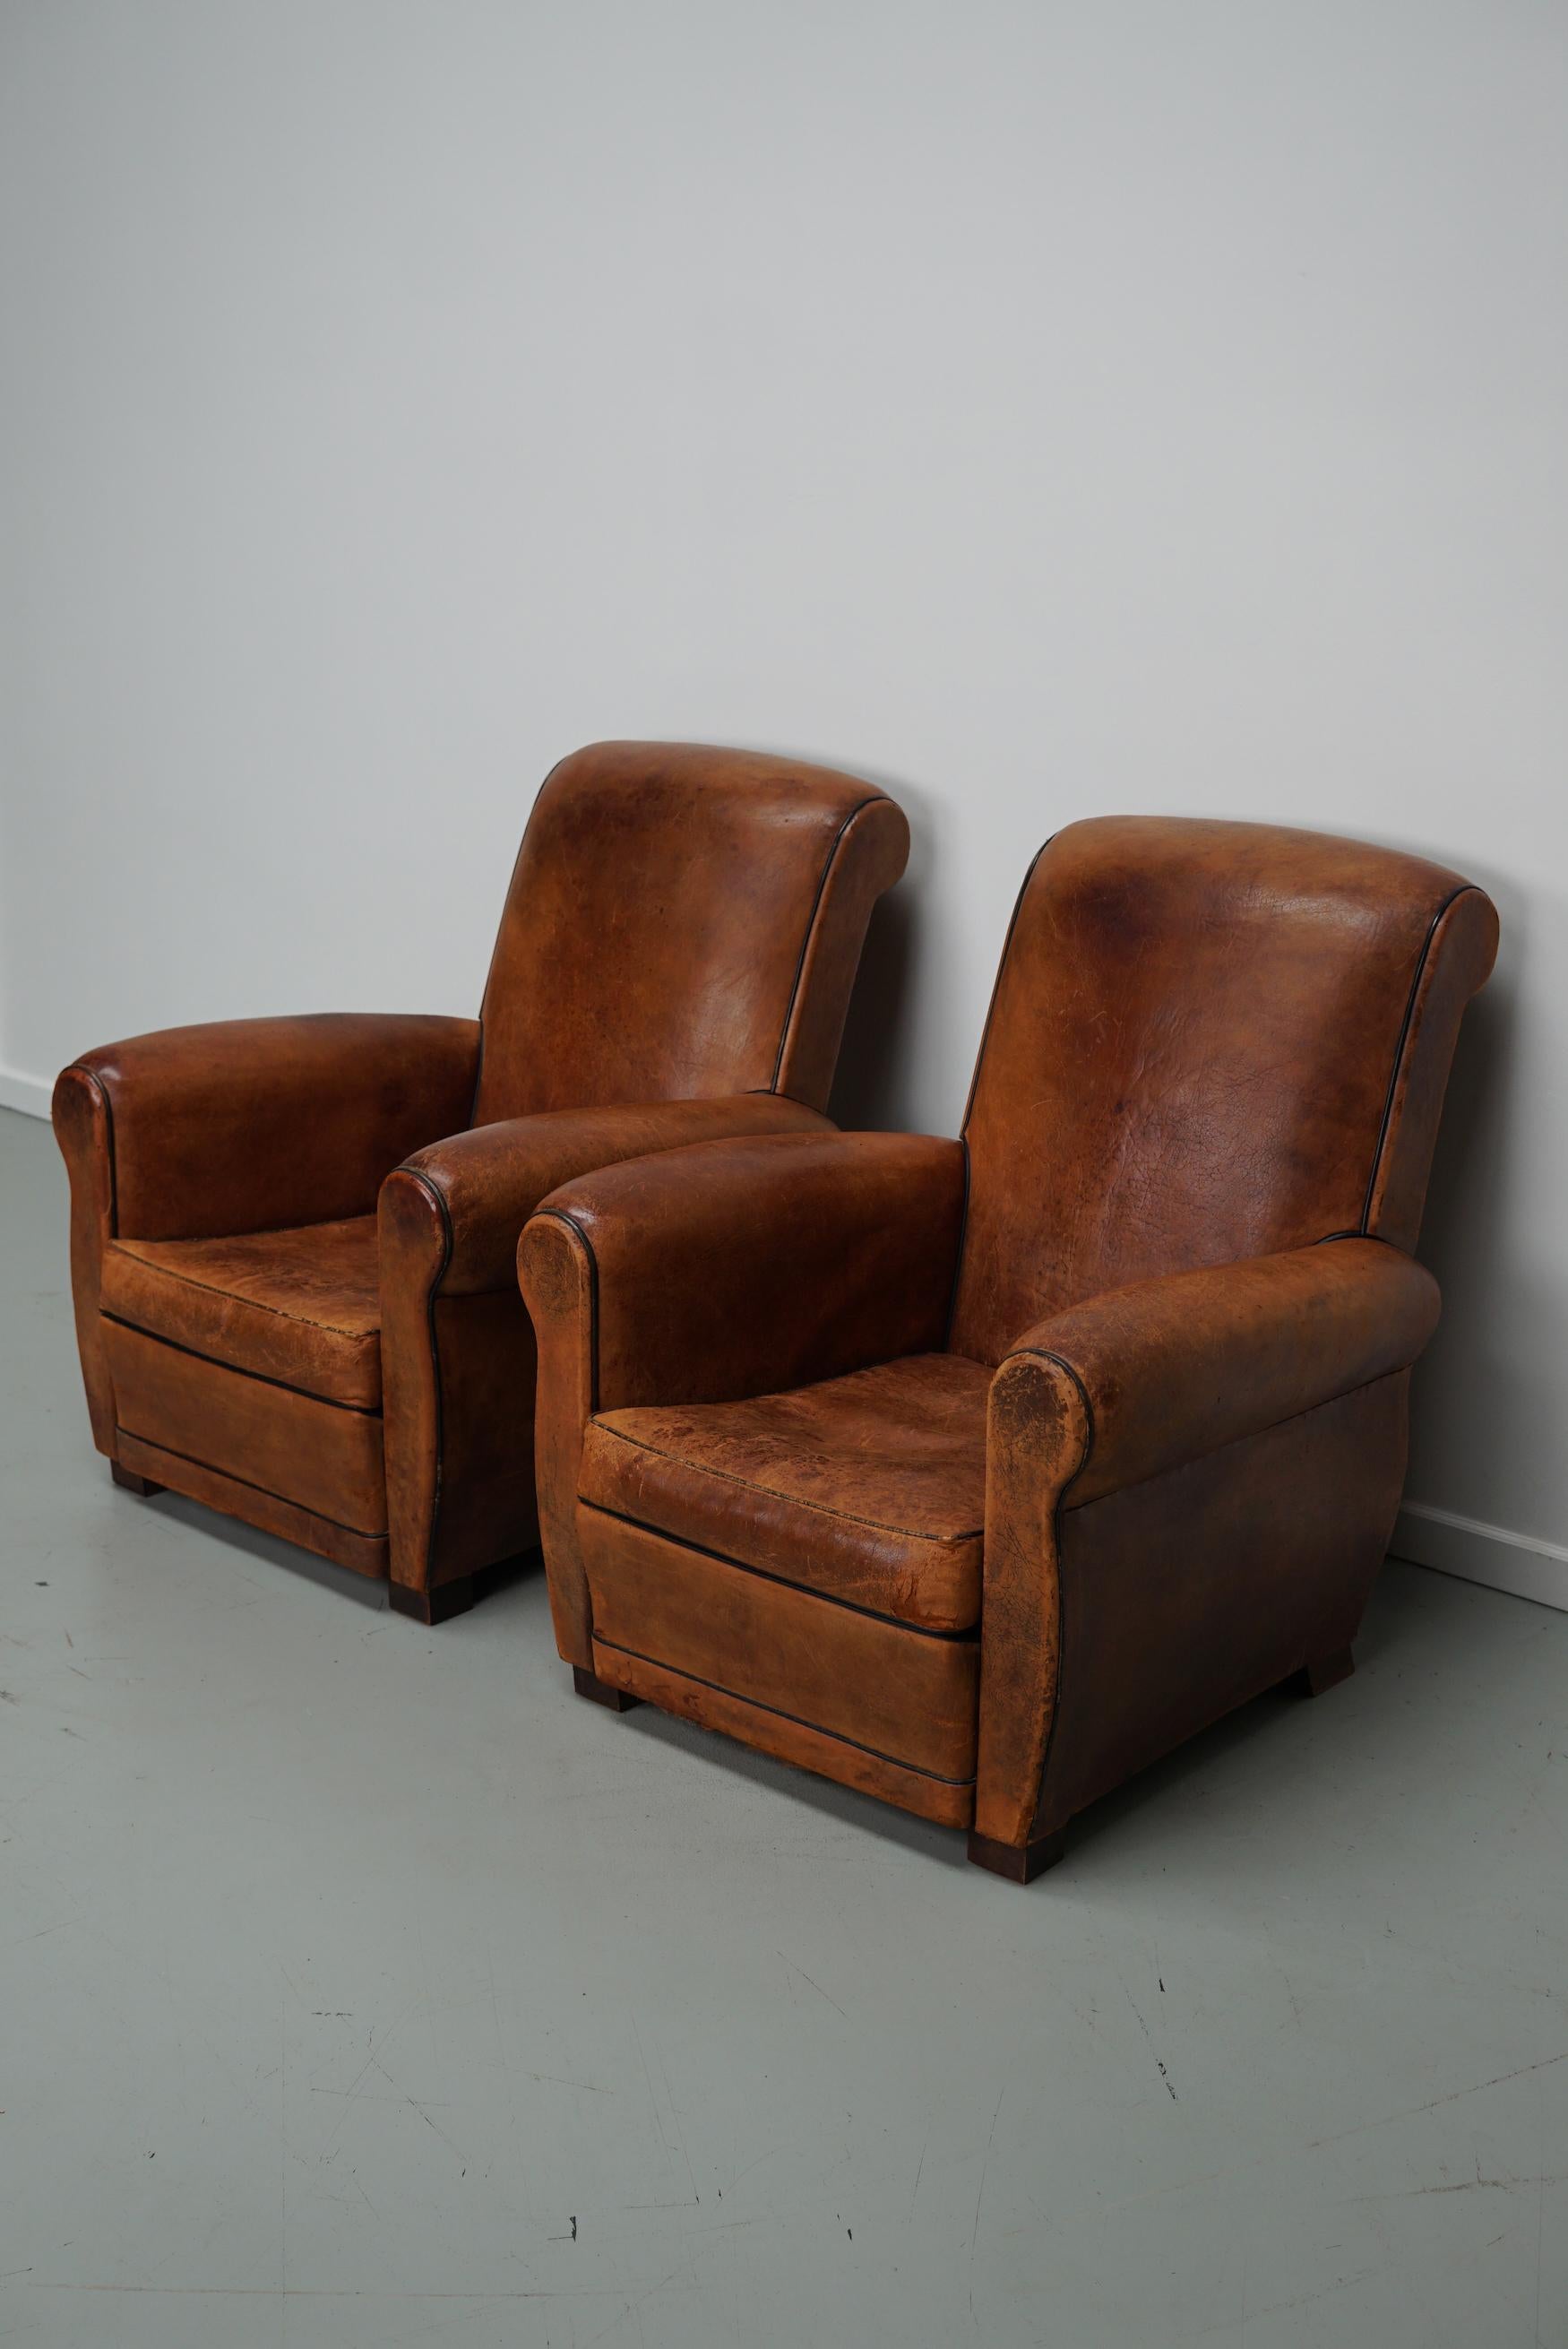 This pair of cognac-colored leather club chairs come from France. They are upholstered with cognac-colored leather and feature metal rivets and wooden legs. They are in a vintage condition and still comfortable.